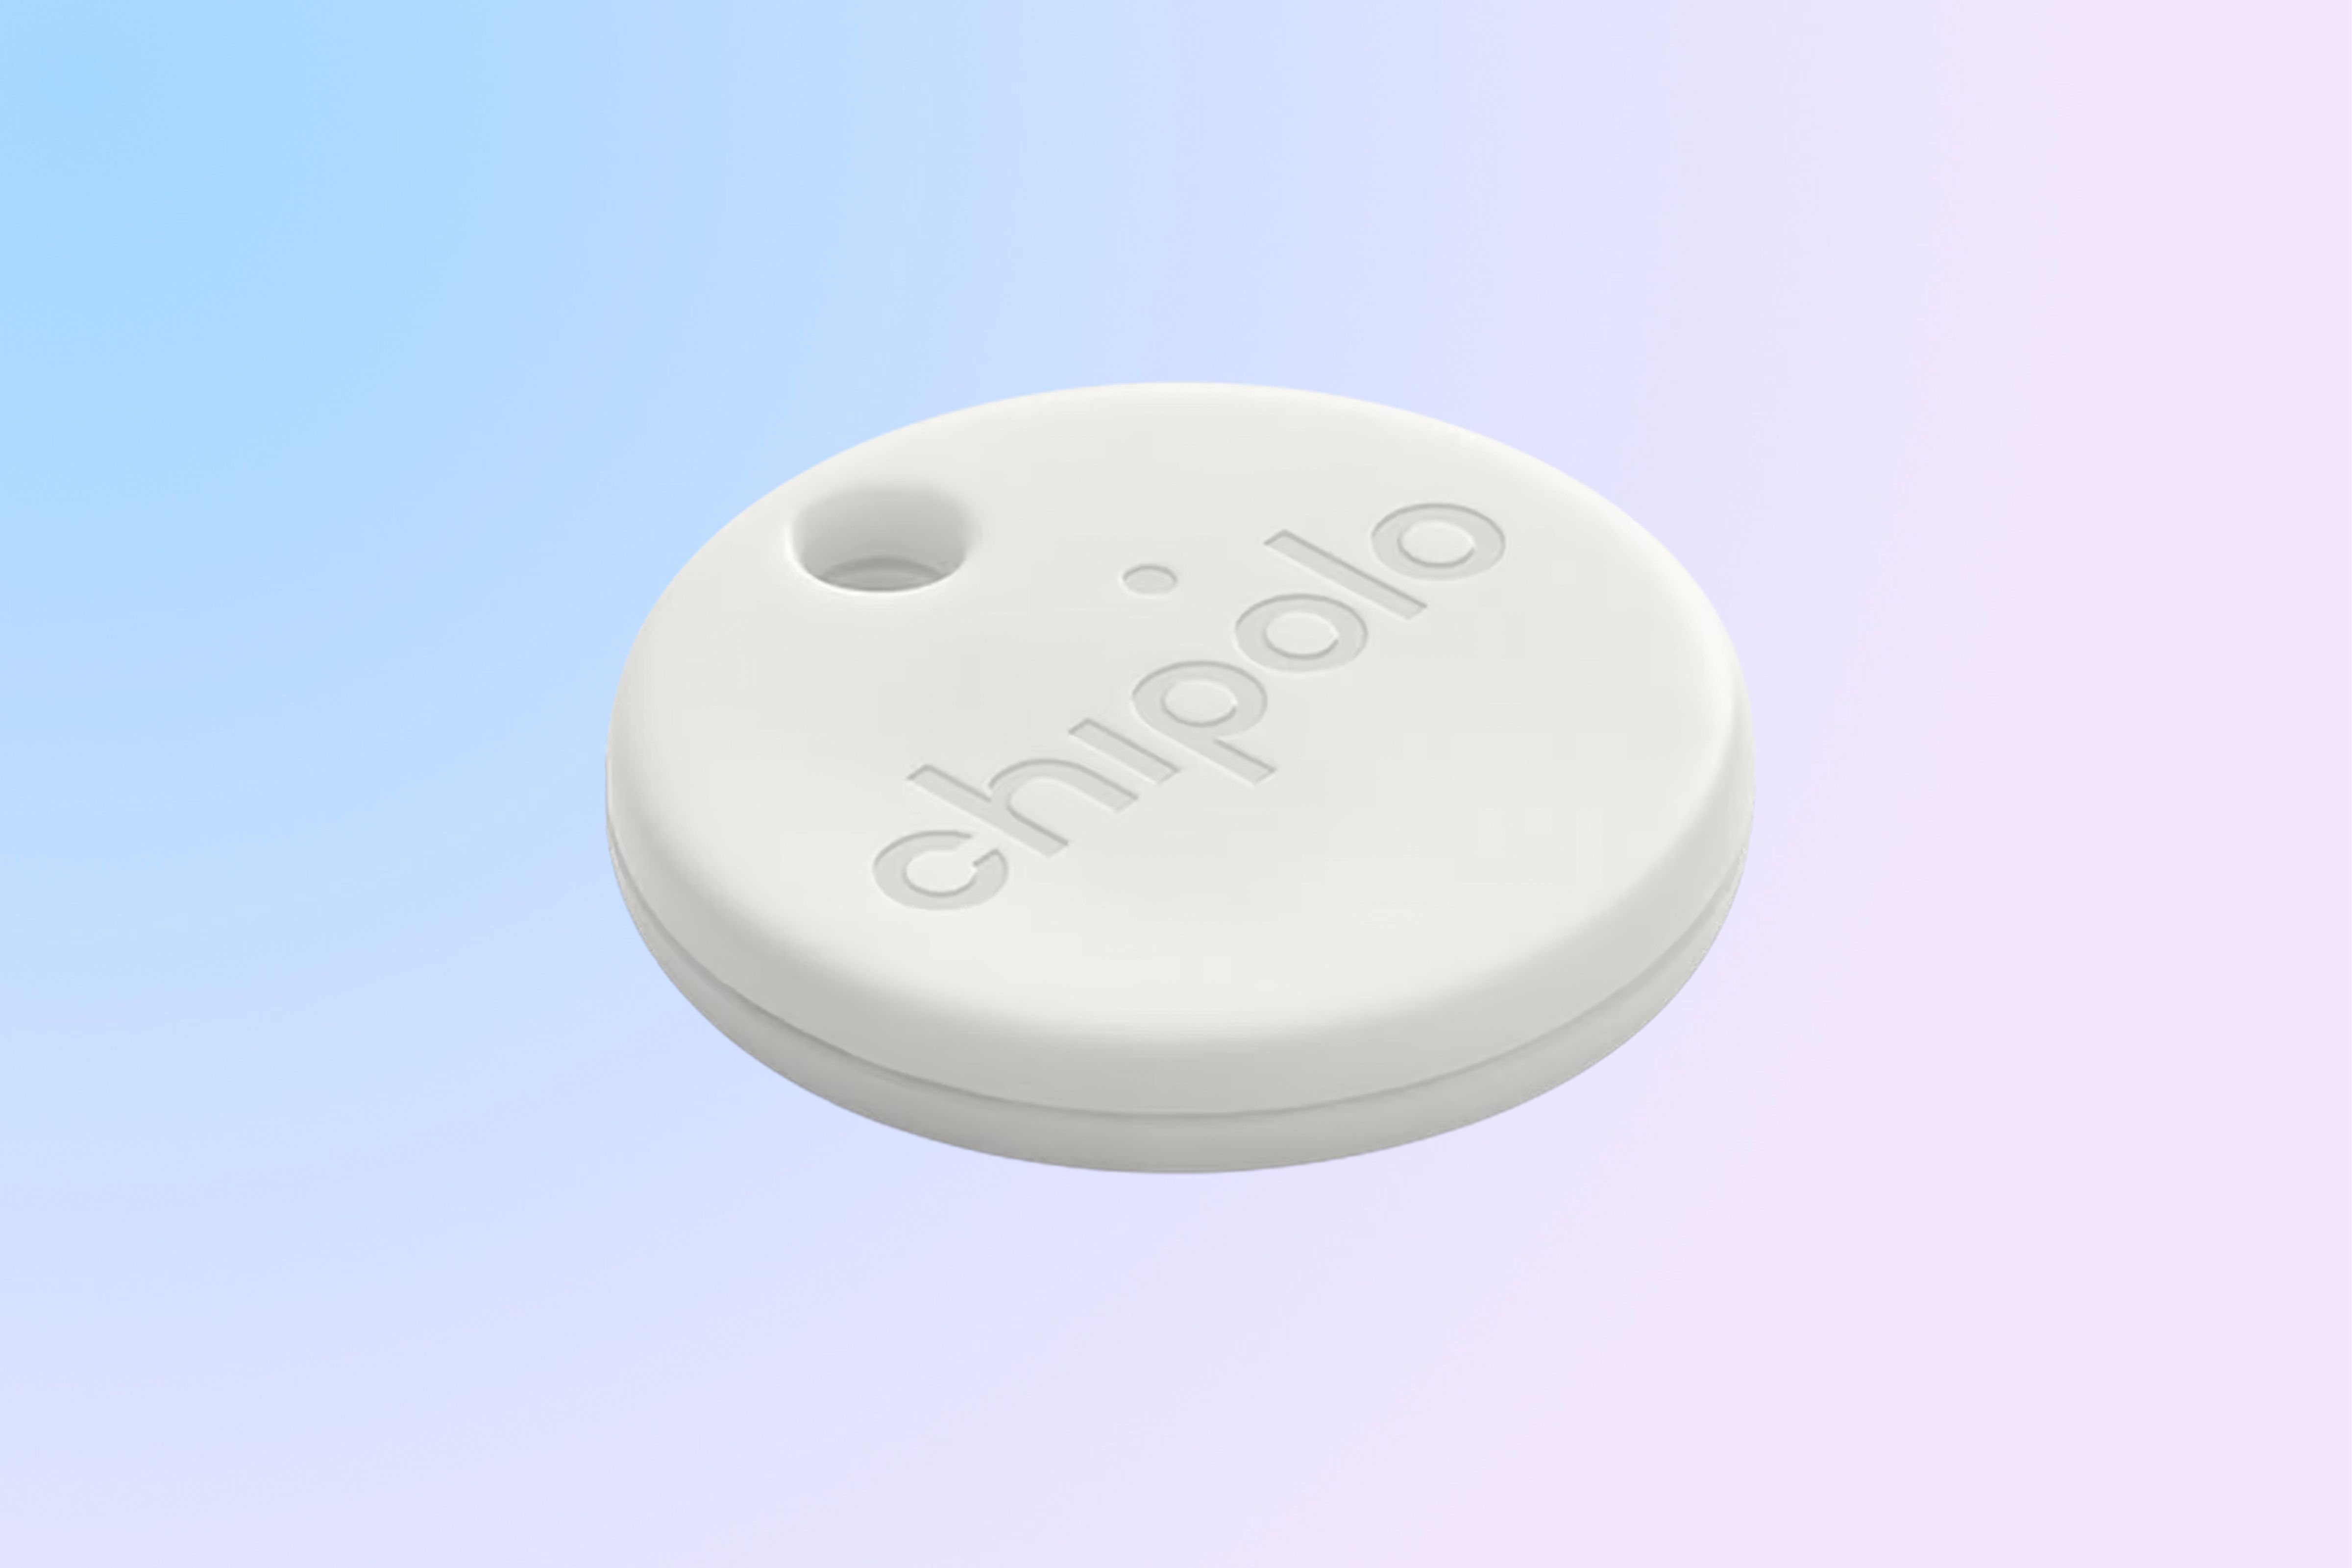 The white Chipolo One Point Bluetooth tracker with keyring hole and logo visible over a bluish-pink background. 